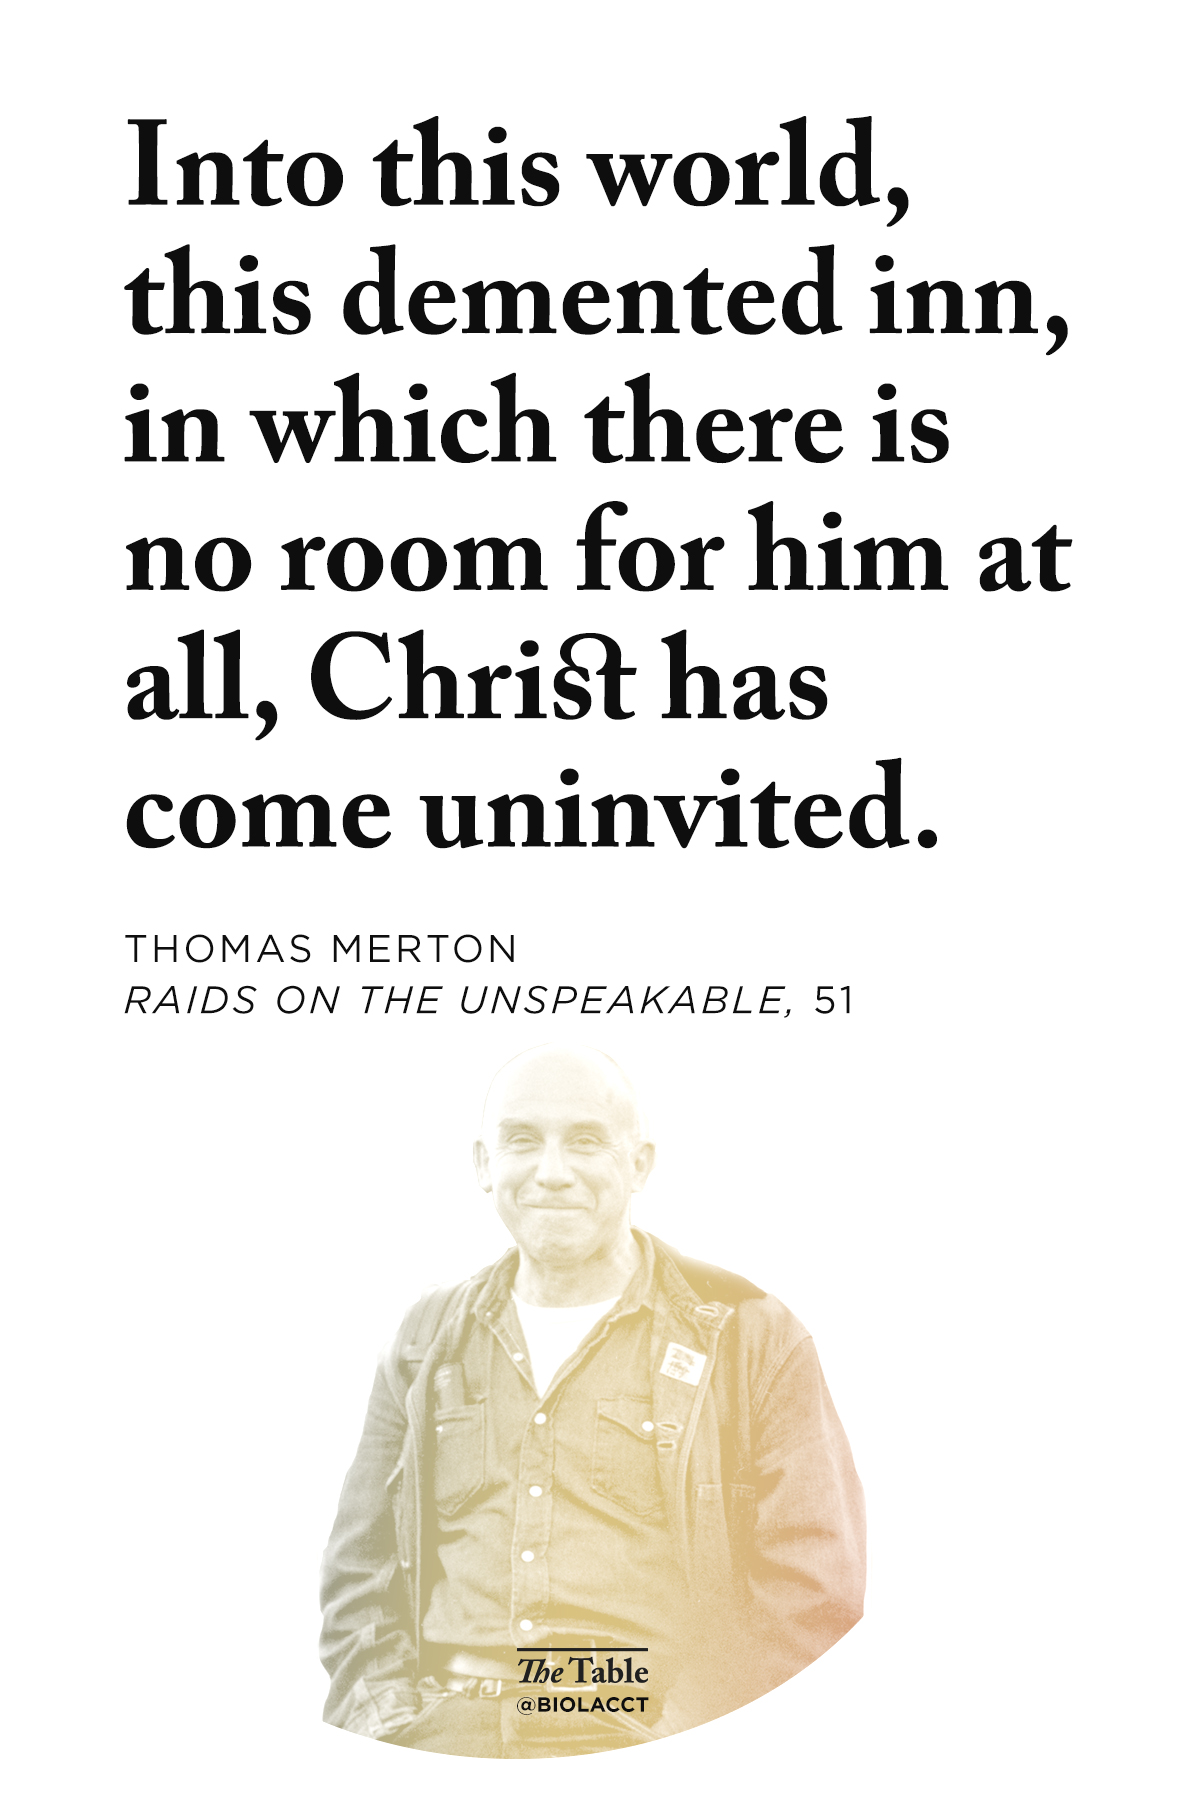 The Uninvited Christ: Thomas Merton on the Shock of Christmas and the Meaning of No Room at the ...